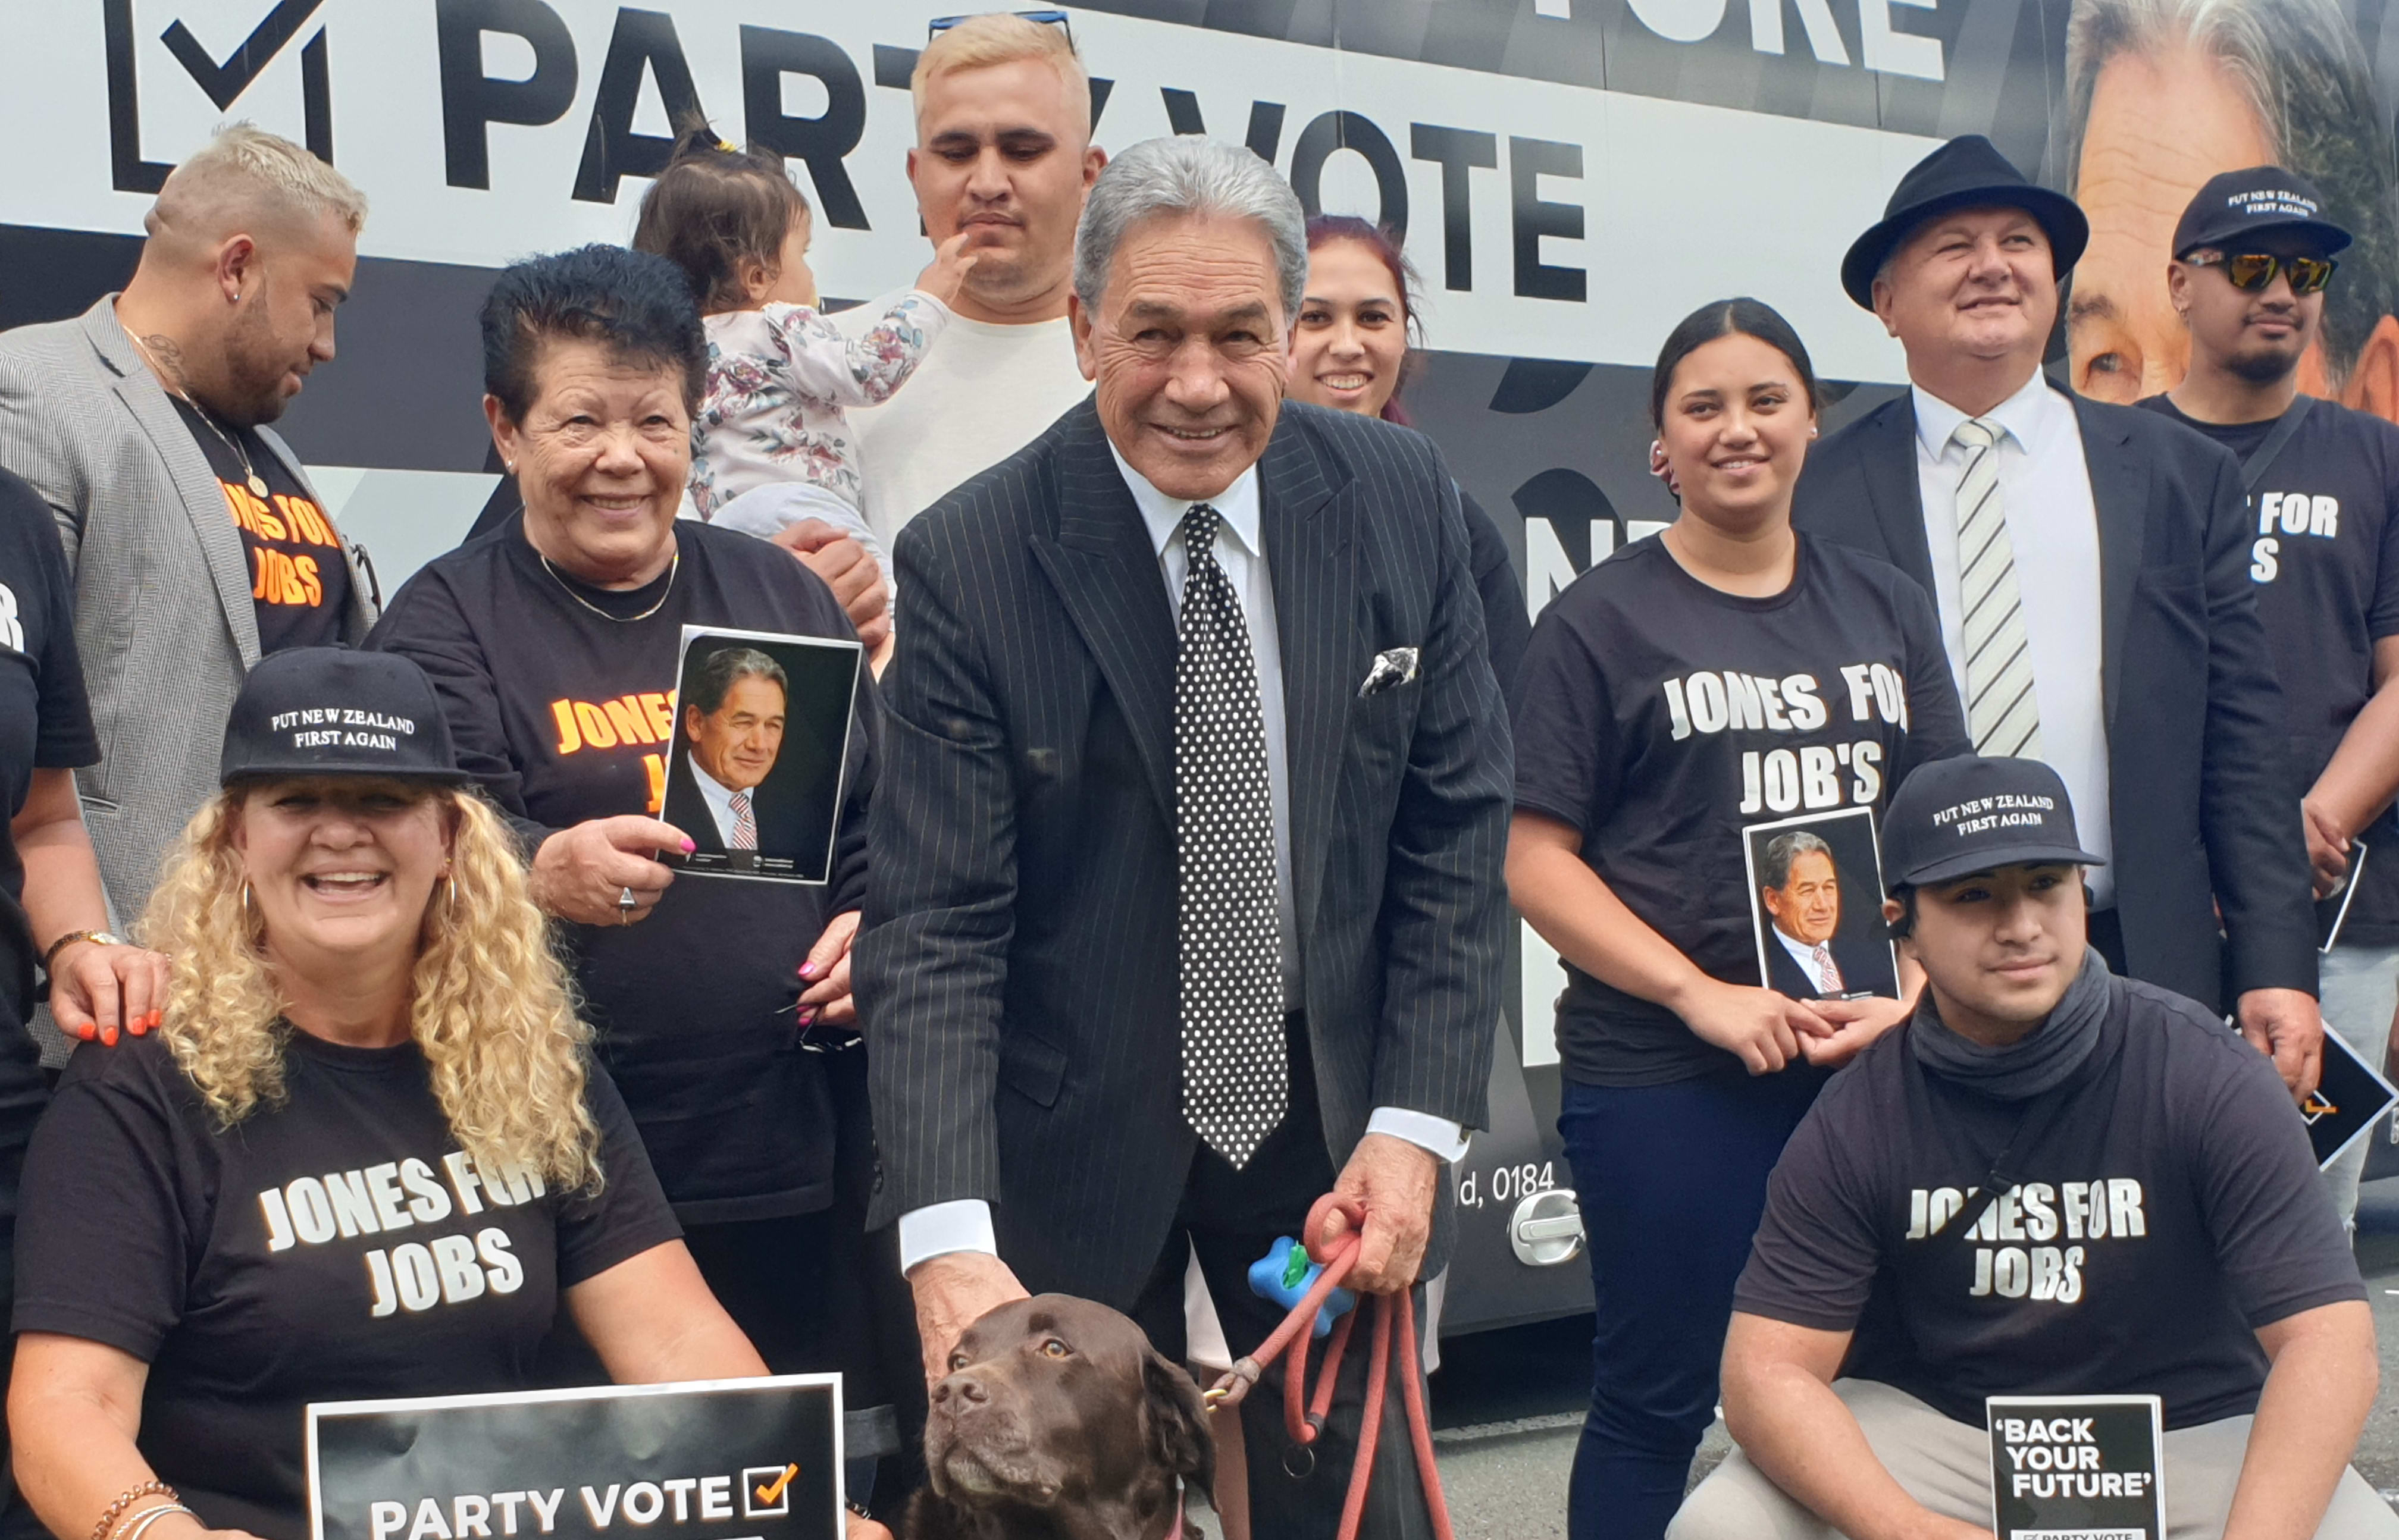 New Zealand First leader Winston Peters and candidate Shane Jones with supporters in Whangārei on 16 October, 2020.